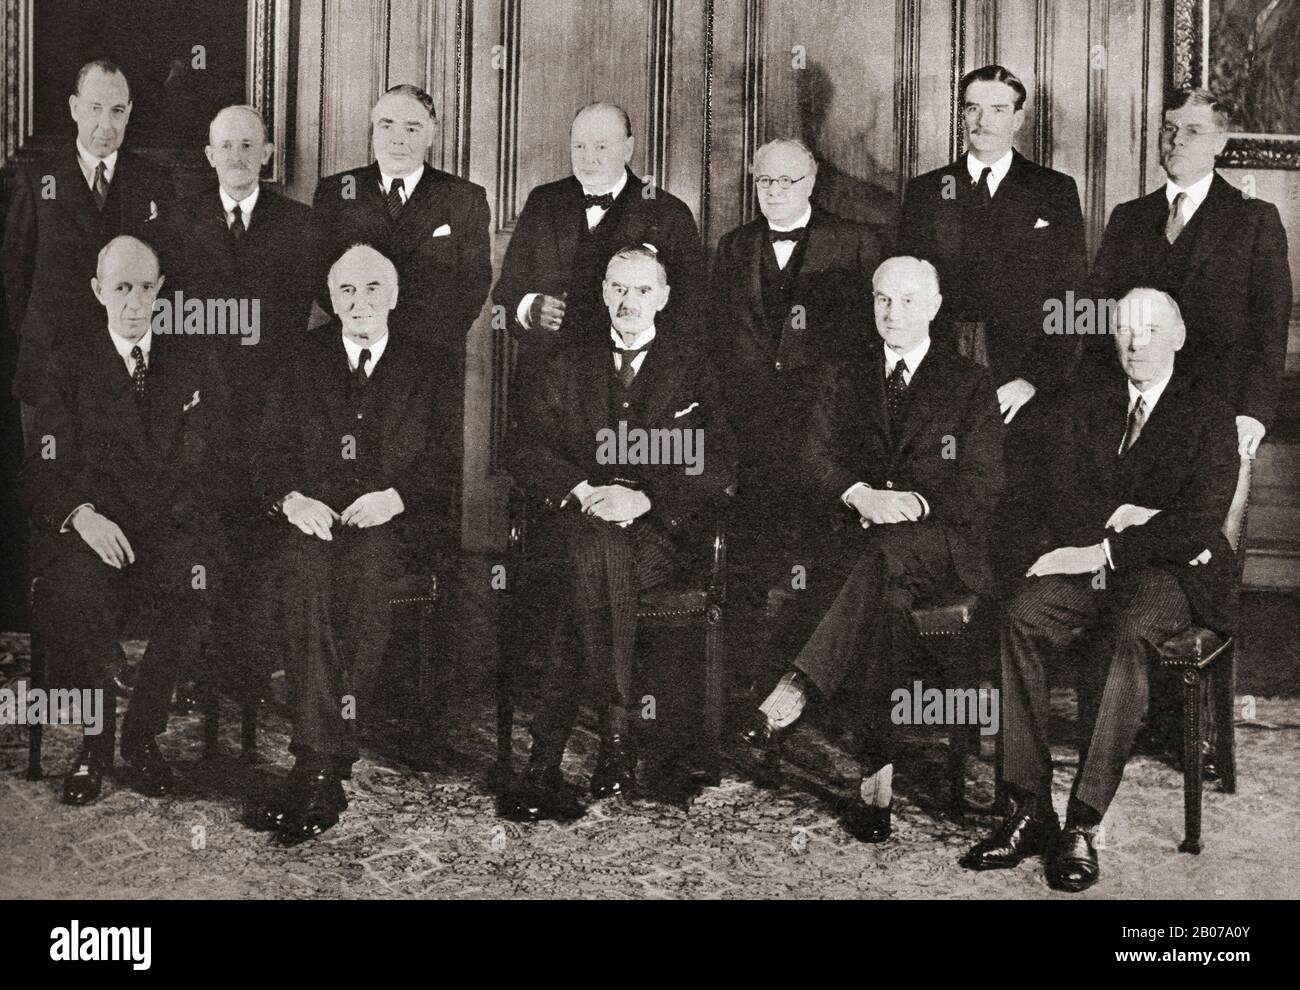 Mr. Neville Chamberlain's War Cabinet,1939. Left to right standing, Sir John Anderson, Home Security.  Lord Hankey, Minister without portfolio.  Mr. L. Hore-Belisha, War.  Mr. Winston Churchill, First Lord of the Admiralty.  Sir Kingsley Wood, Air.  Mr. Eden, Dominion Affairs.  Sir Edward Bridges, Secretary to the War Cabinet. Left to right seated, Lord Halifax, Foreign Secretary.  Sir John Simon, Chancellor of the Exchequer.  Mr. Neville Chamberlain, Prime Minister.  Sir Samuel Hoare, Lord Privy Seal.  Lord Chatfield, Minister for Co-ordination of Defence.  Sir John Anderson and Mr. Eden, tho Stock Photo